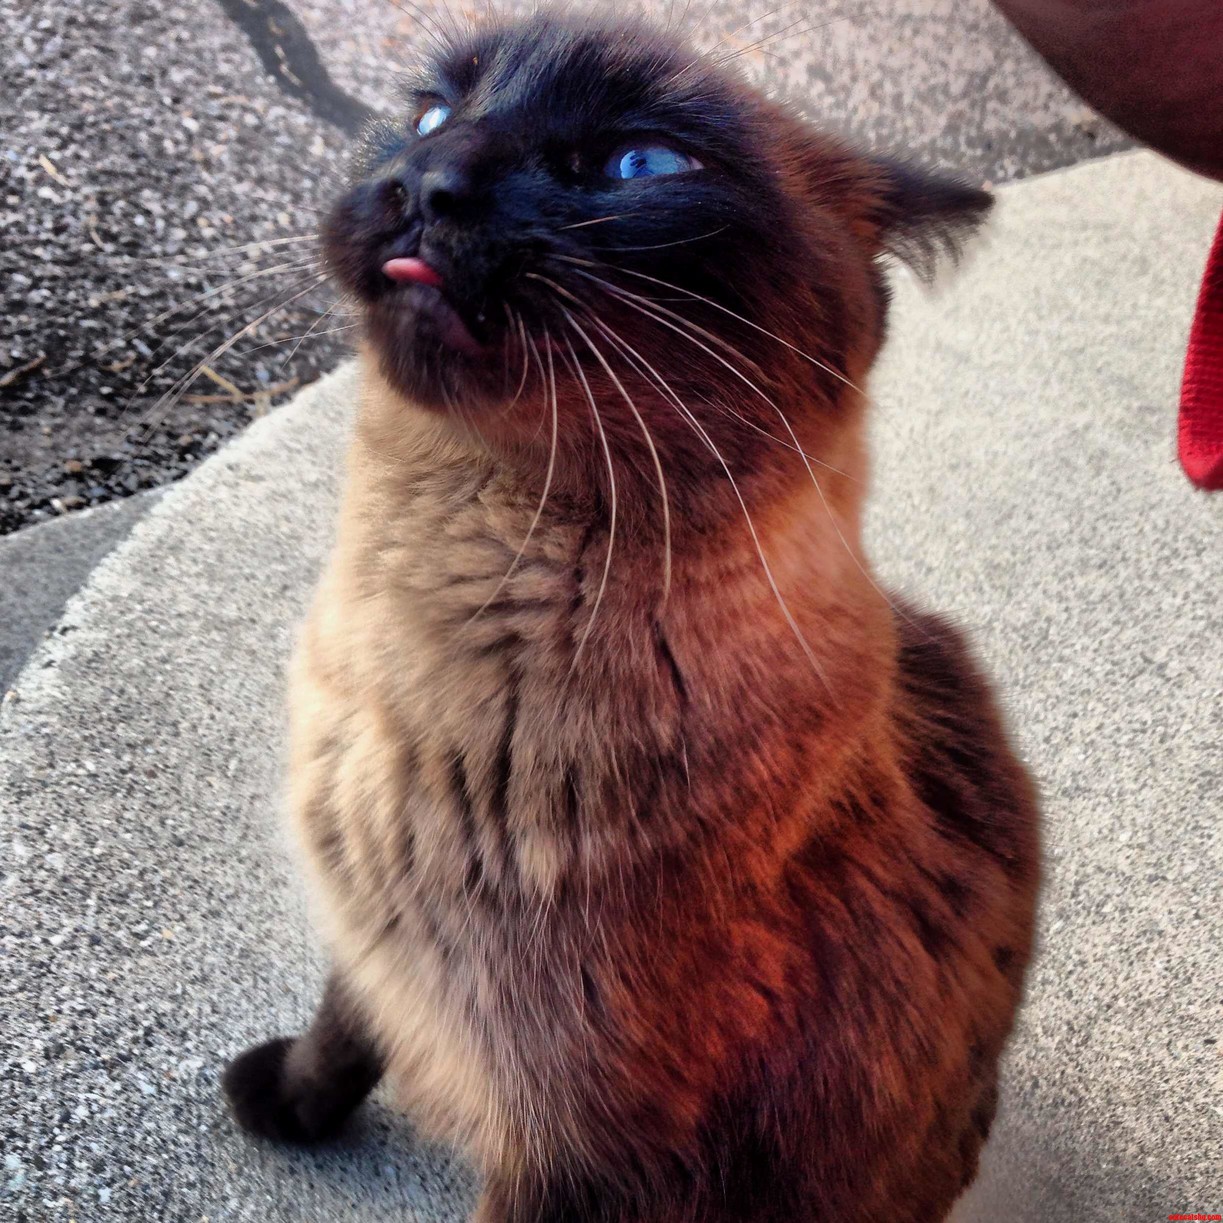 I Met This Cat Behind The Alley. He Was Happy To See Me.